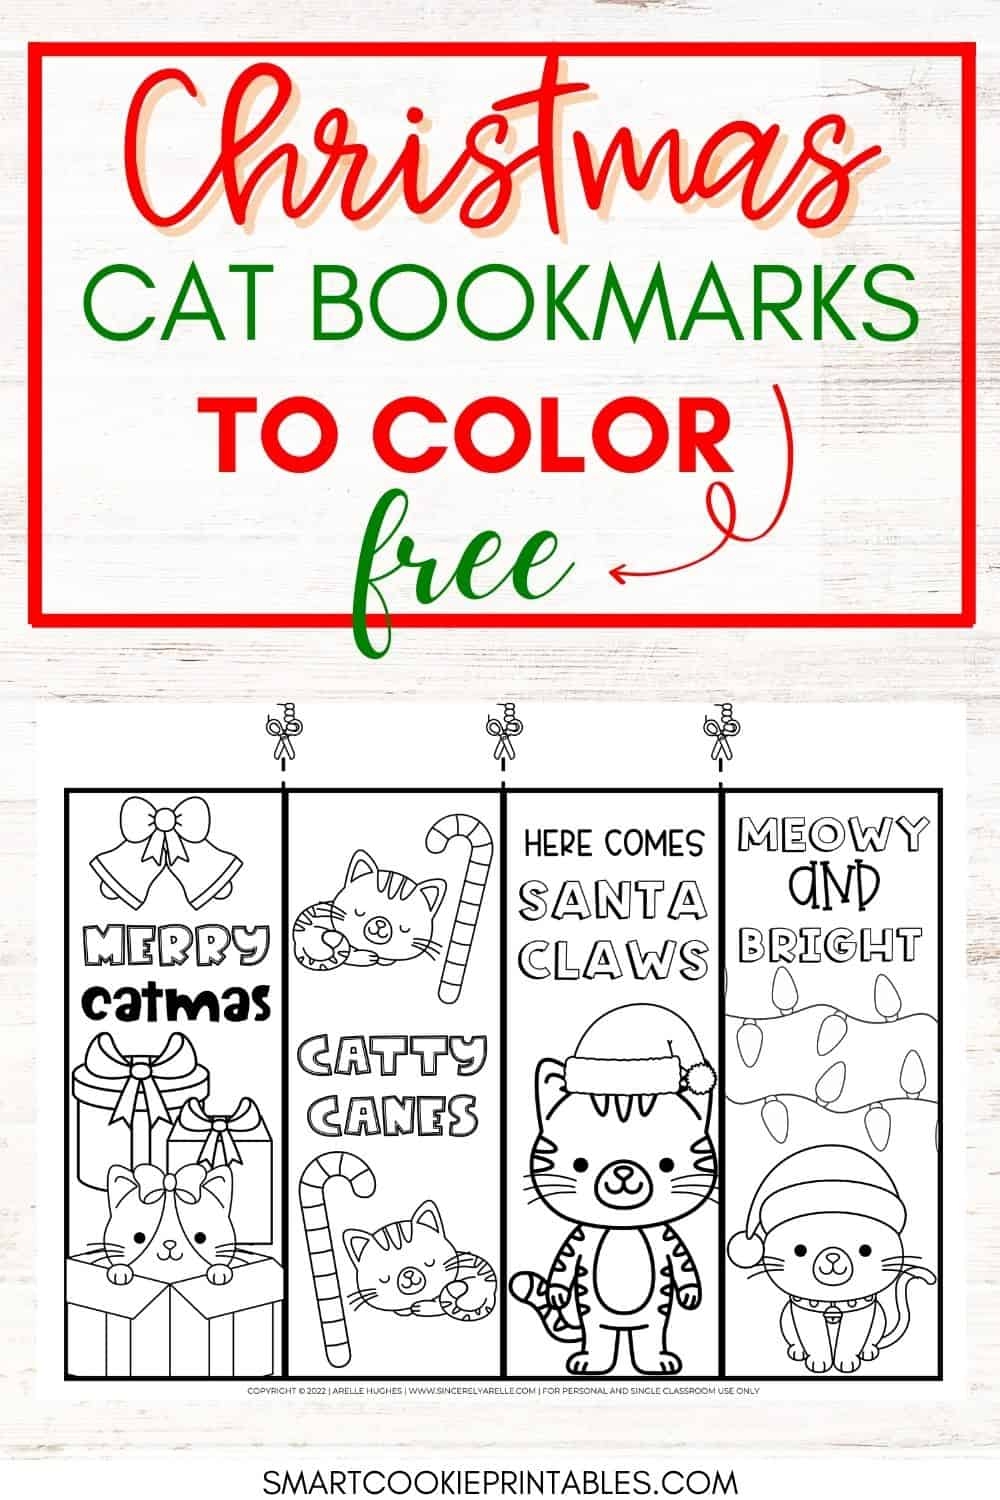 Free Printable Cute Christmas Cat Bookmarks To Color Smart Cookie Printables